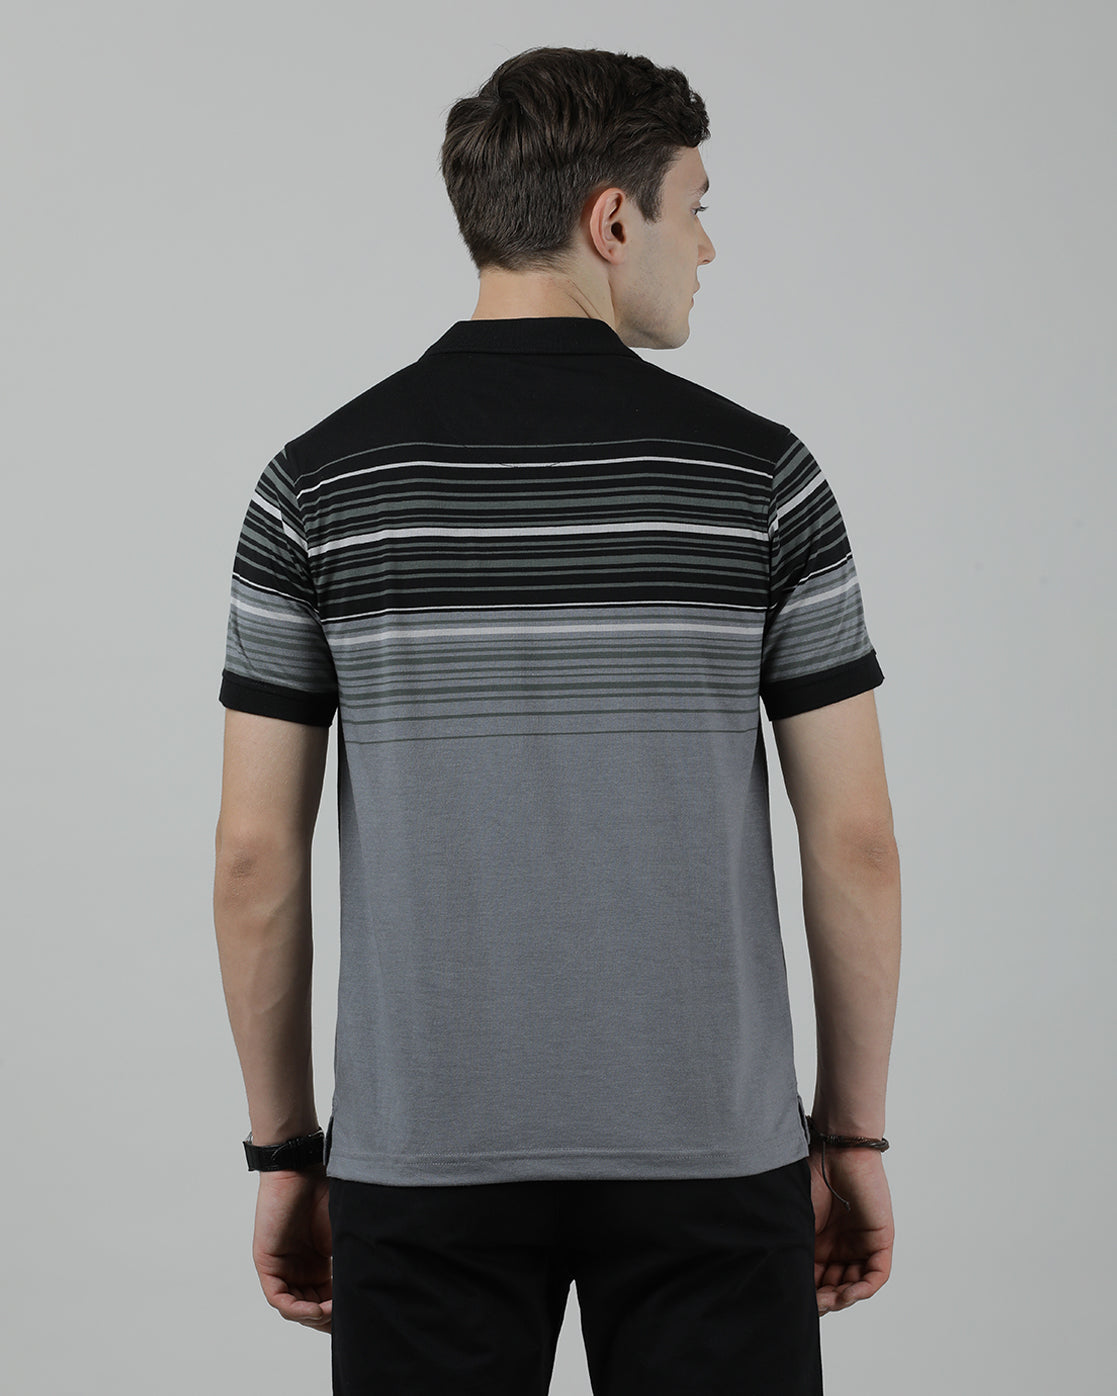 Casual Black T-Shirt Half Sleeve Slim Fit Jersey Engineering Stripe with Collar for Men